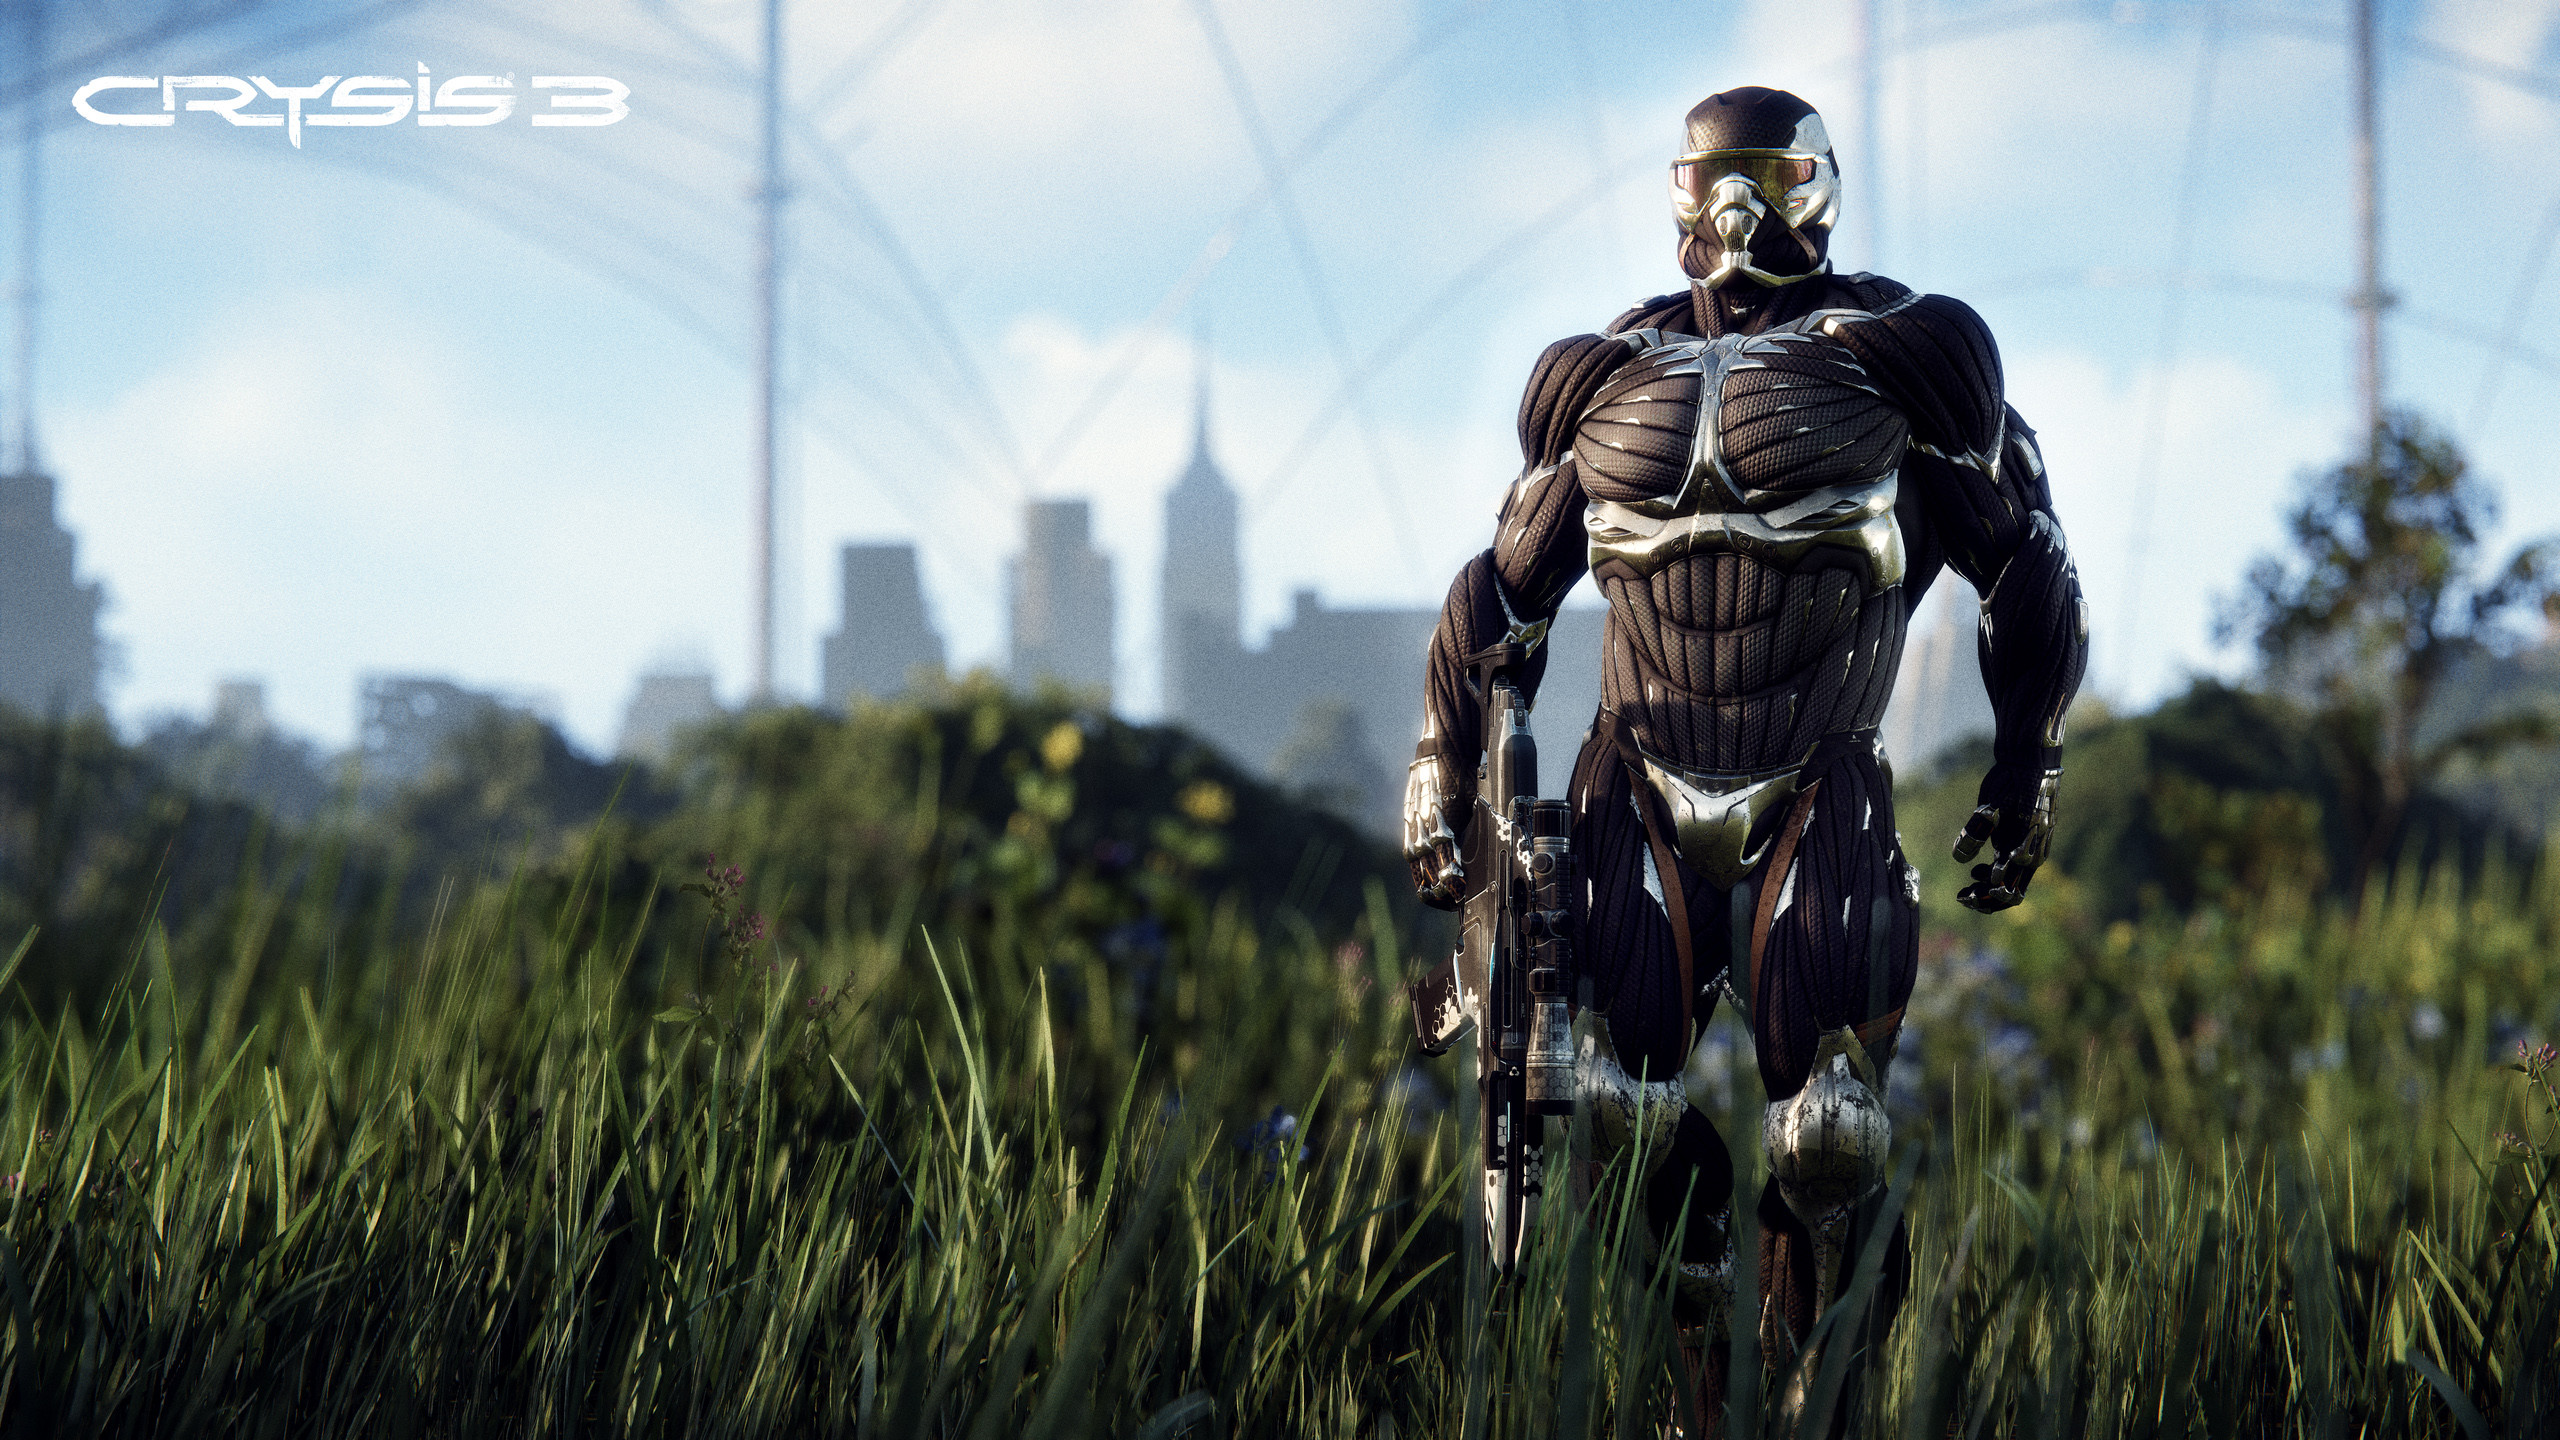 2560x1440 130 Crysis 3 HD Wallpapers | Backgrounds - Wallpaper Abyss ...